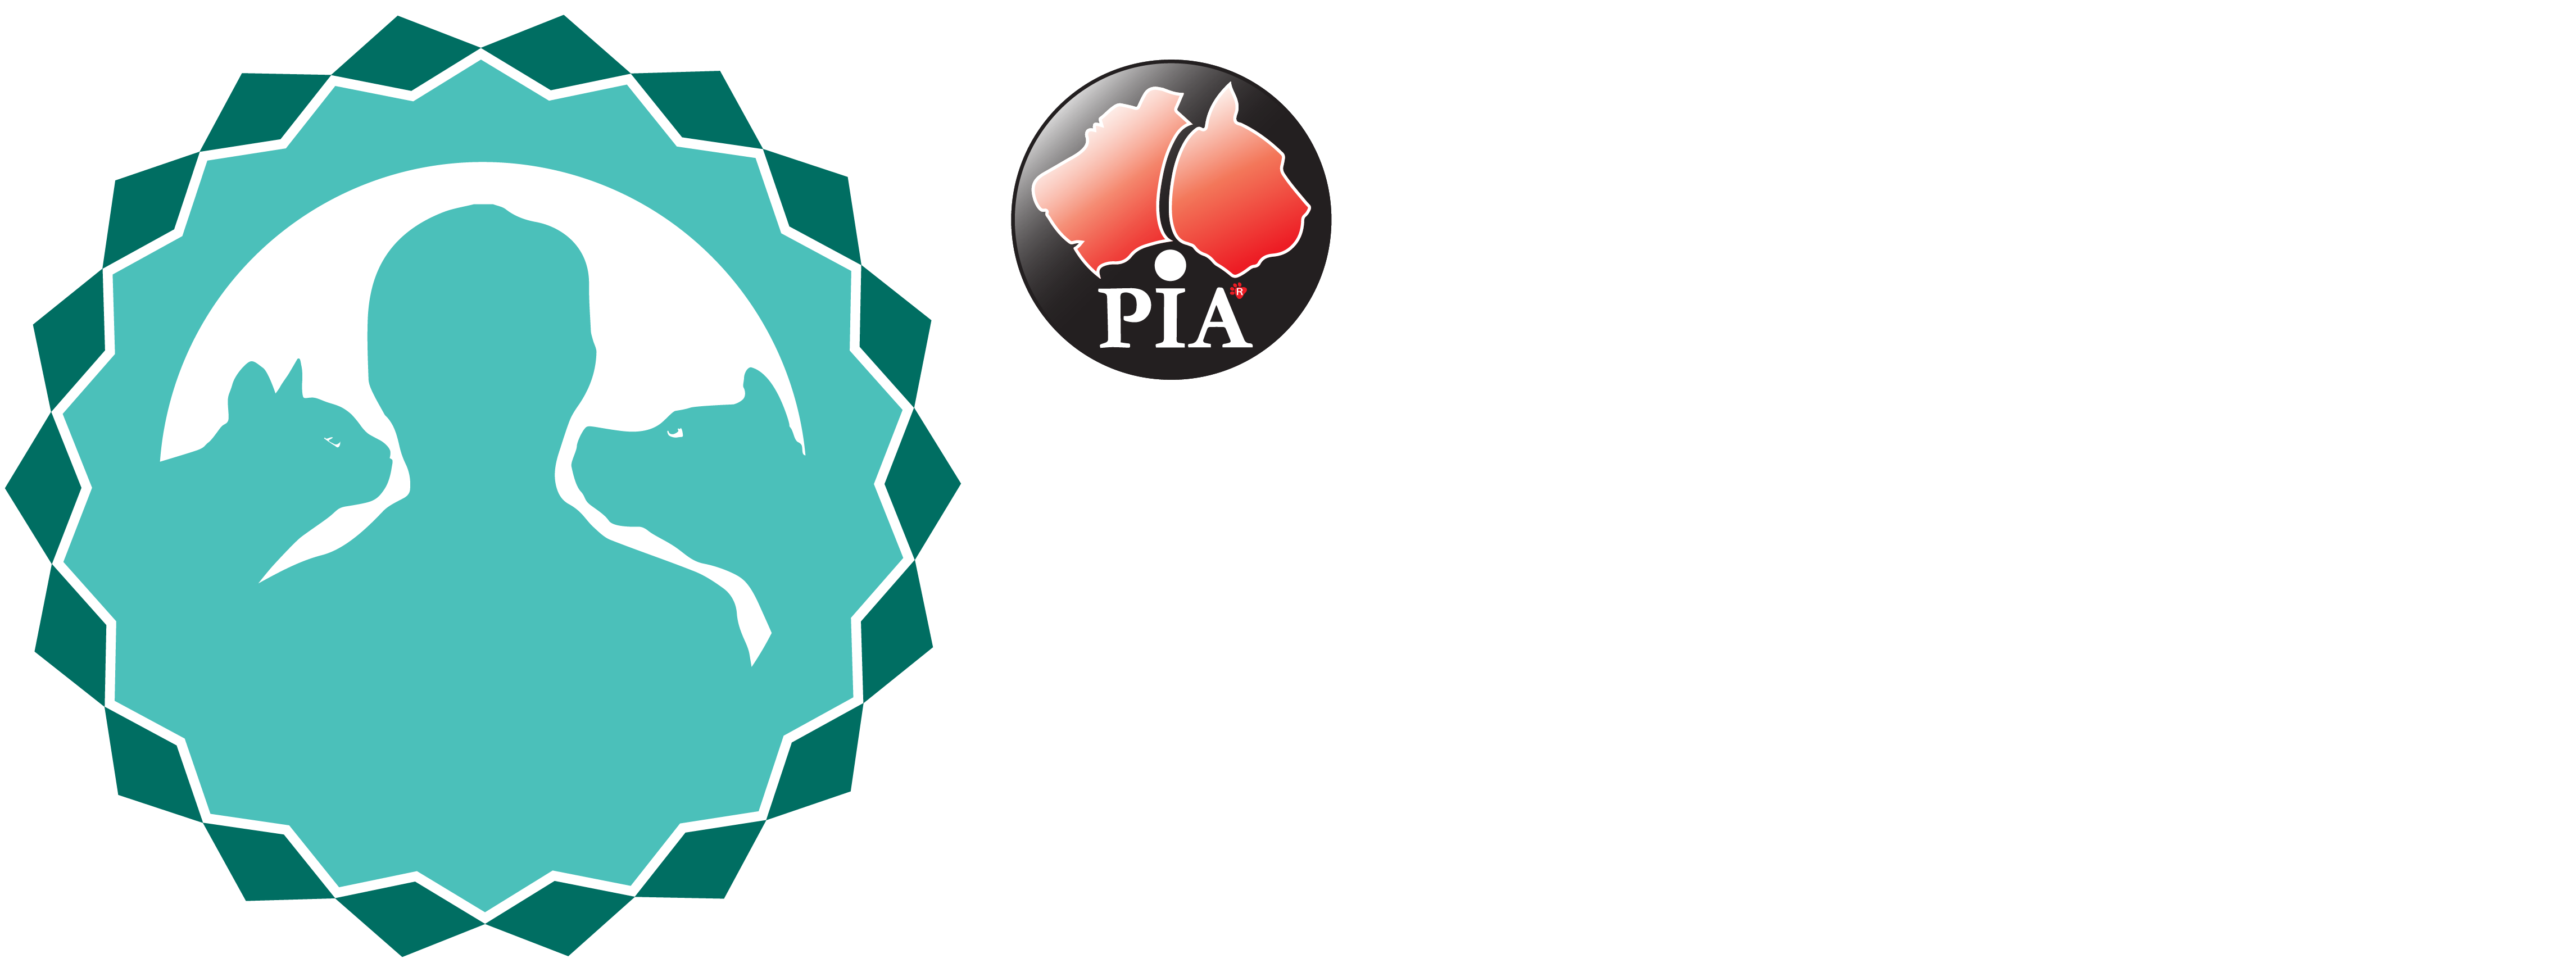 Rescue Awards Logo 2021 With PIA As Sponsor - Final_Logo in White - No background